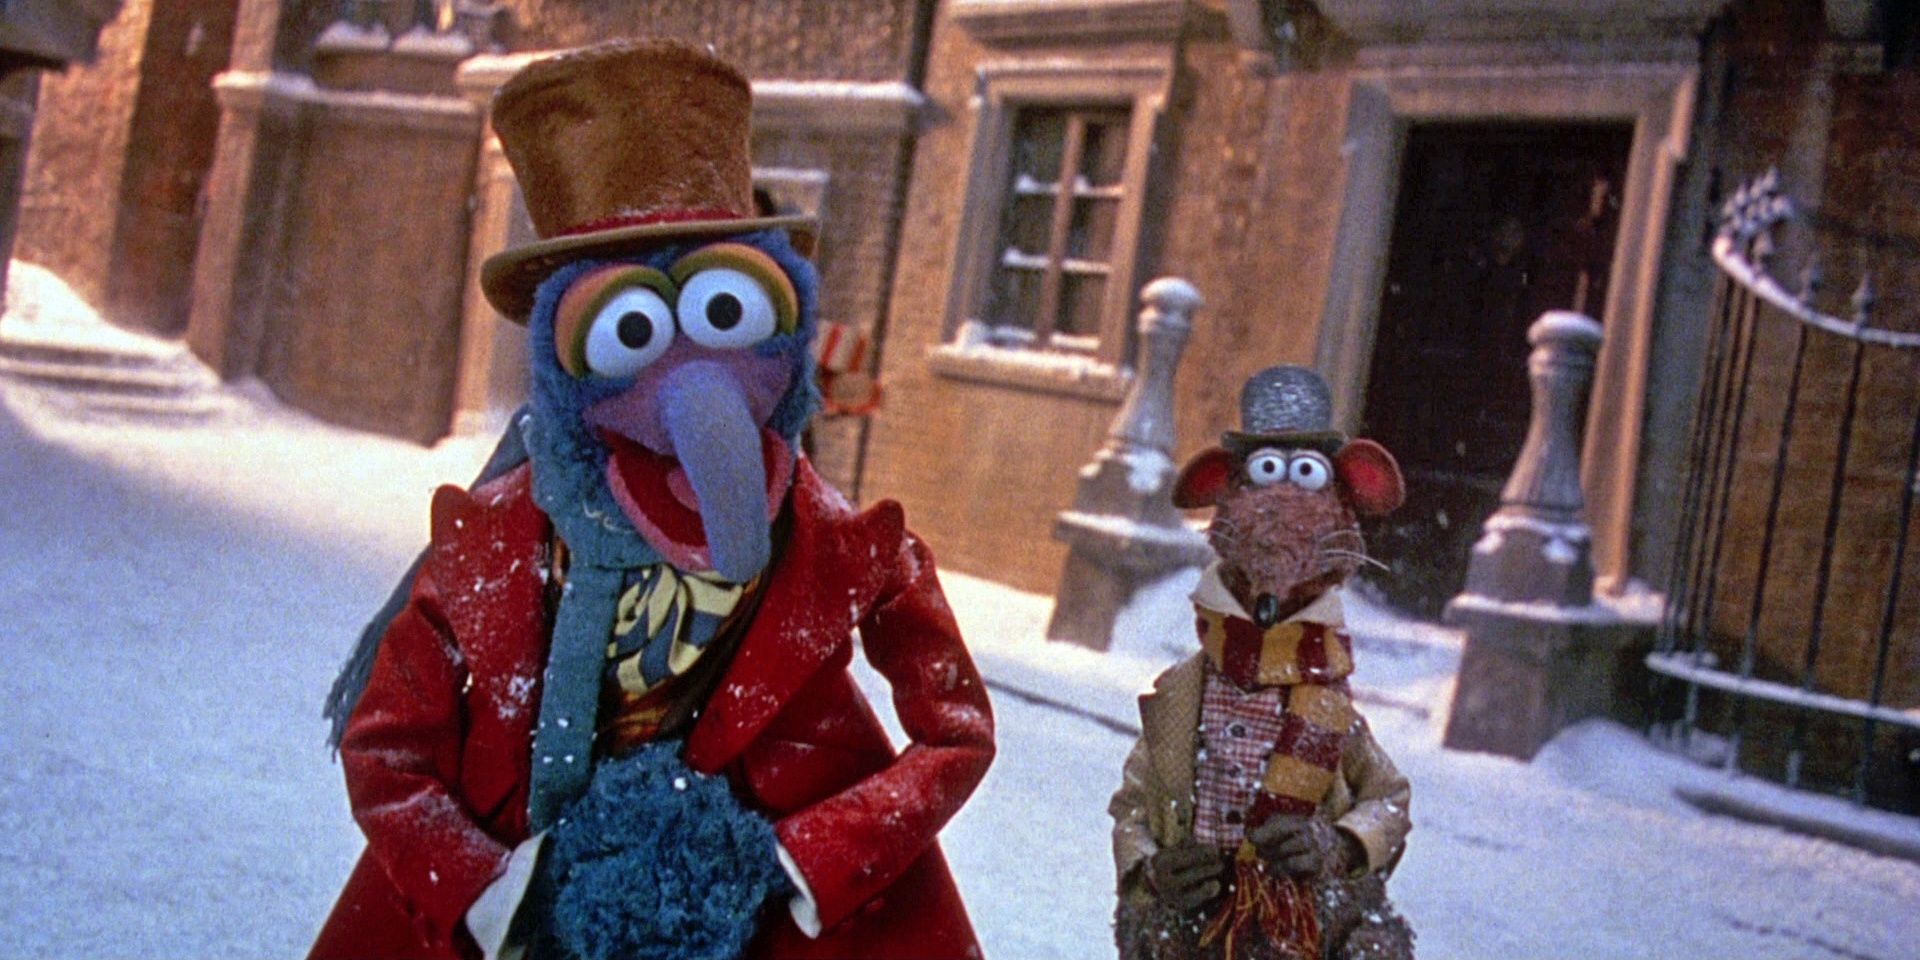 The 10 Most Overrated Christmas Movies According To Reddit